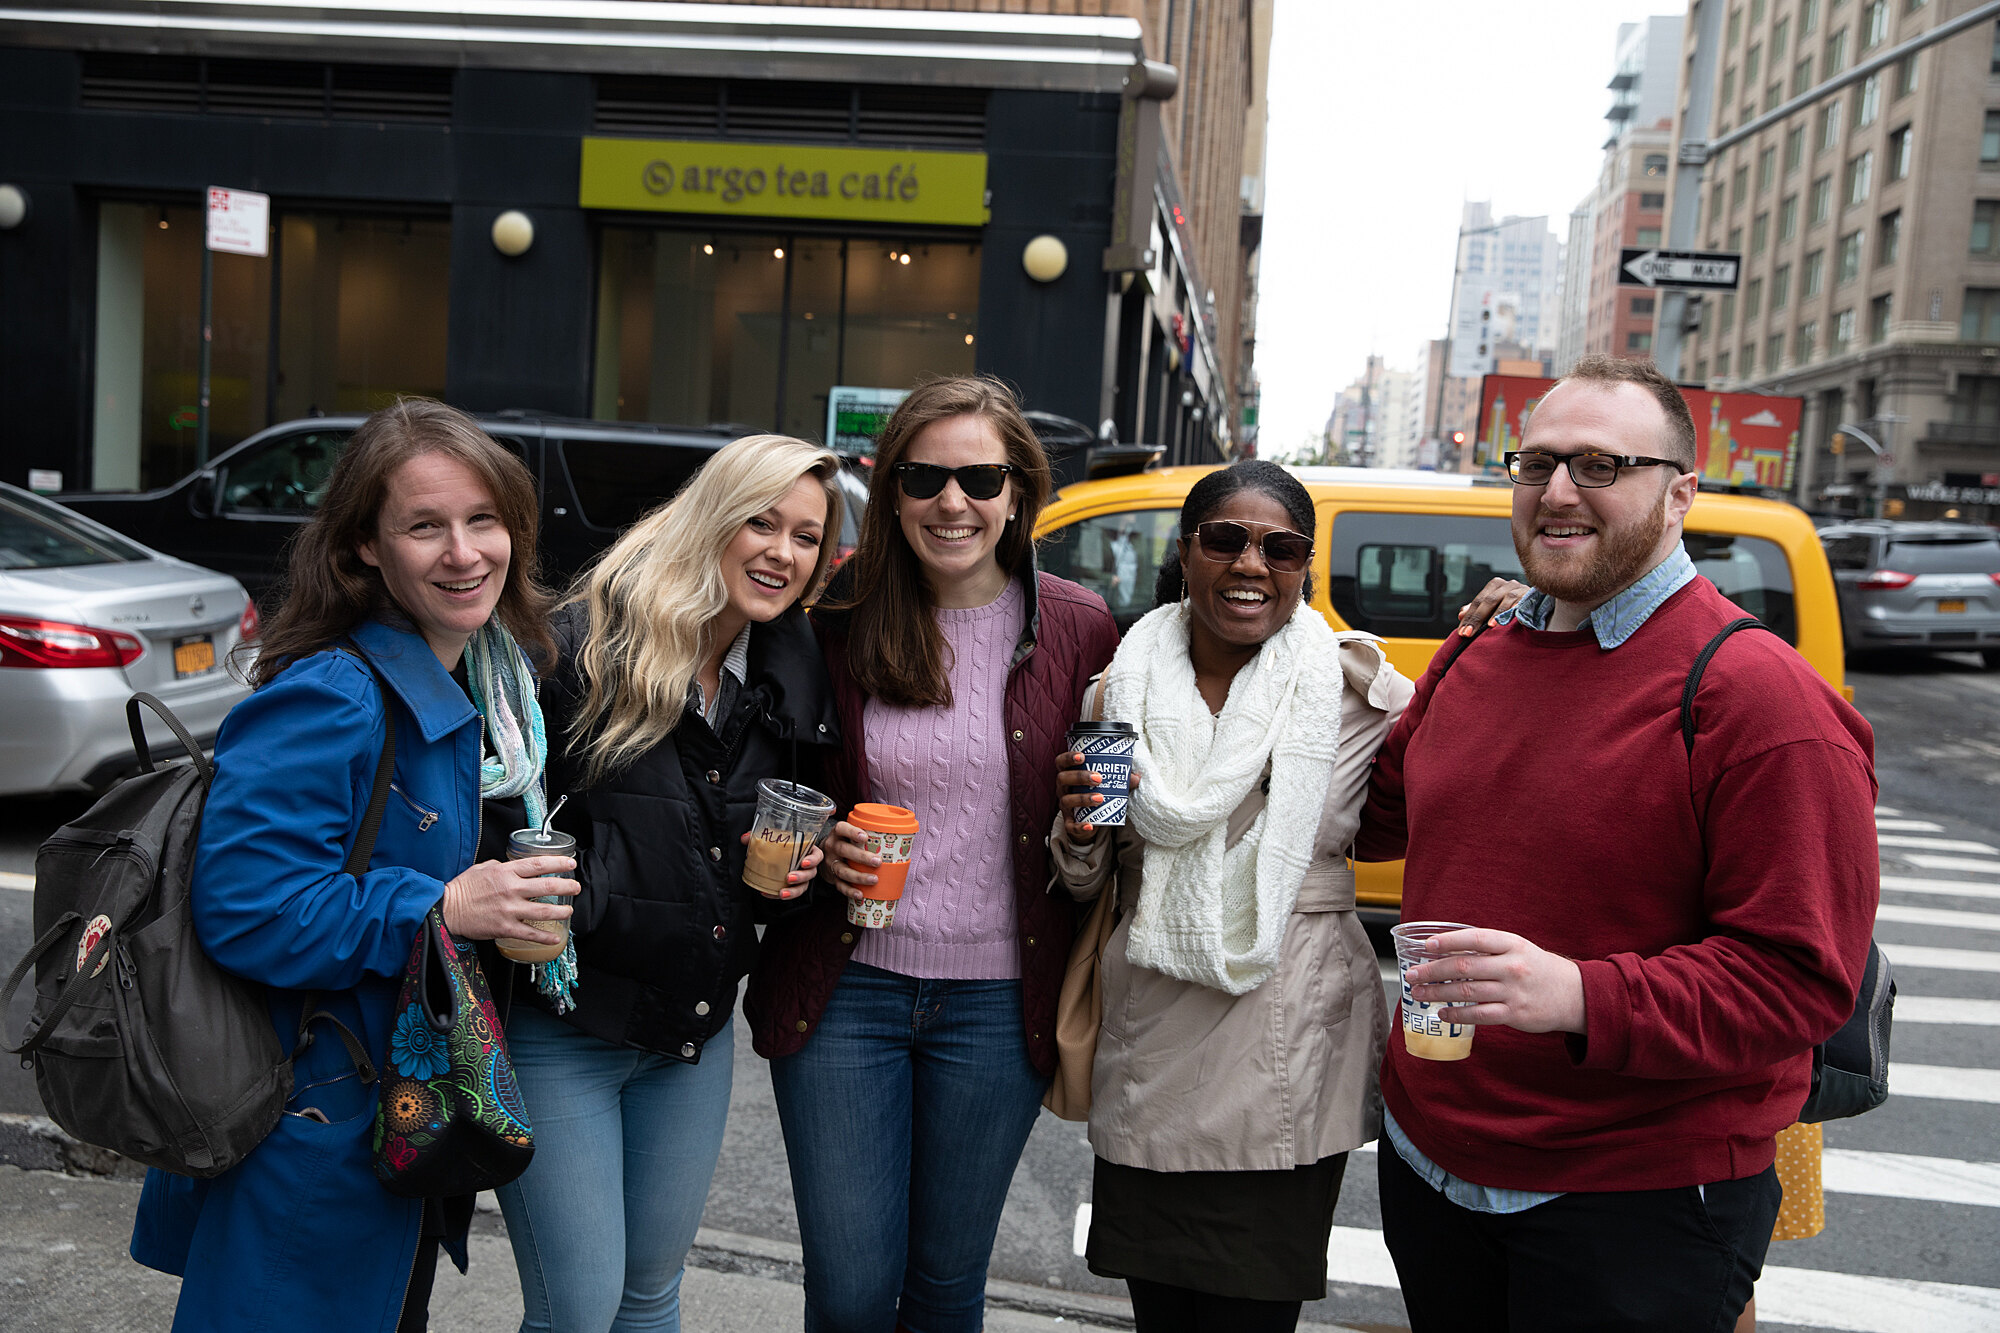 Michelle Kedem, Kristen Poemer, Alana Althans, Imani Doyle, and Sivan Philo pose for a photo on a busy New York City street after a coffee break
